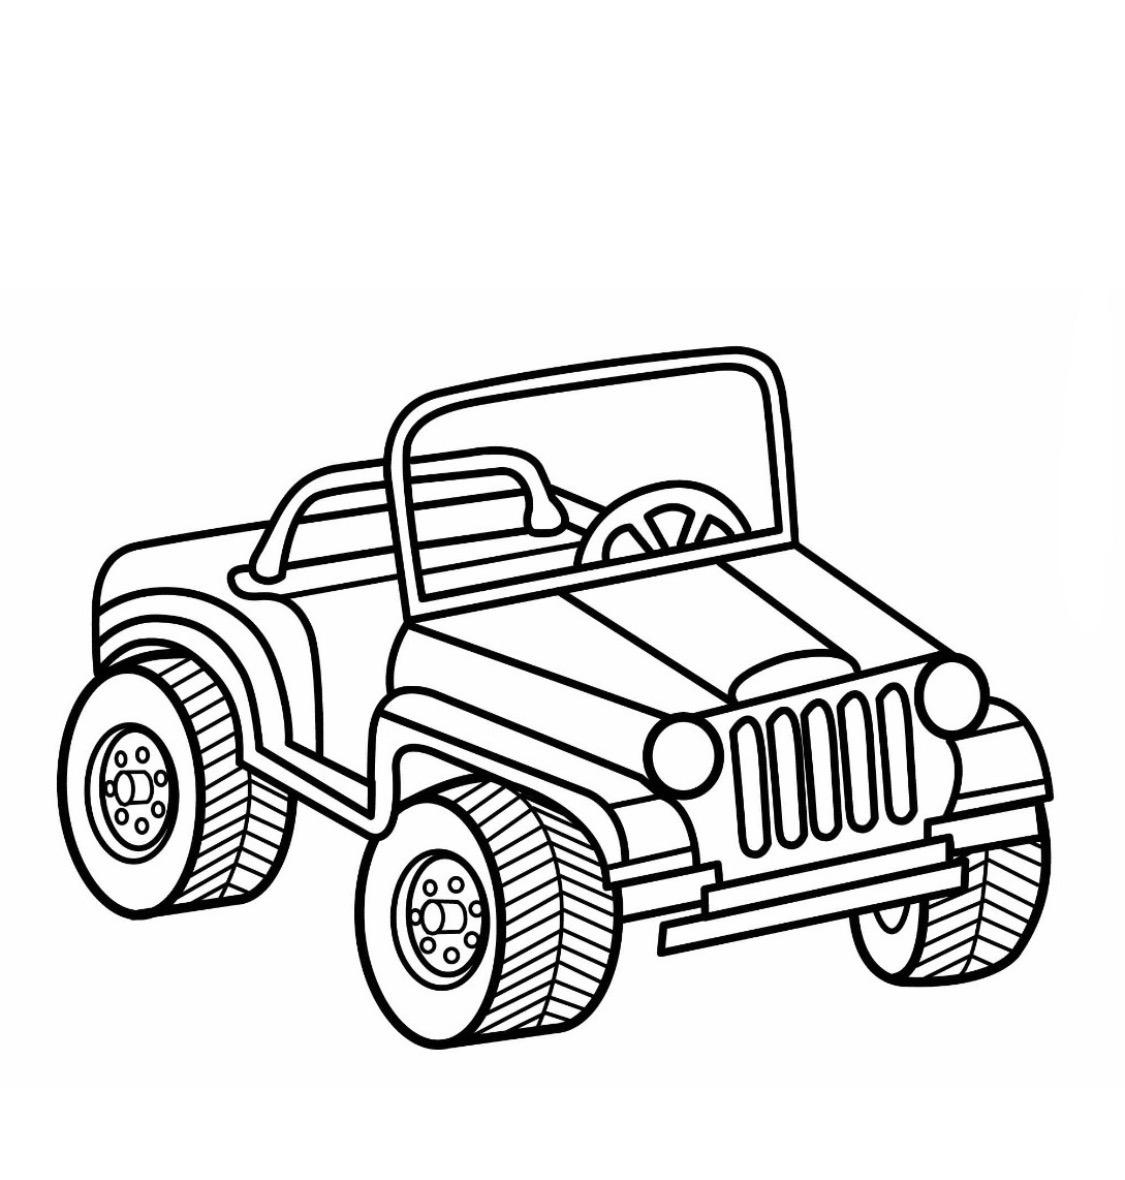 4-wheeler-coloring-pages-at-getcolorings-free-printable-colorings-pages-to-print-and-color